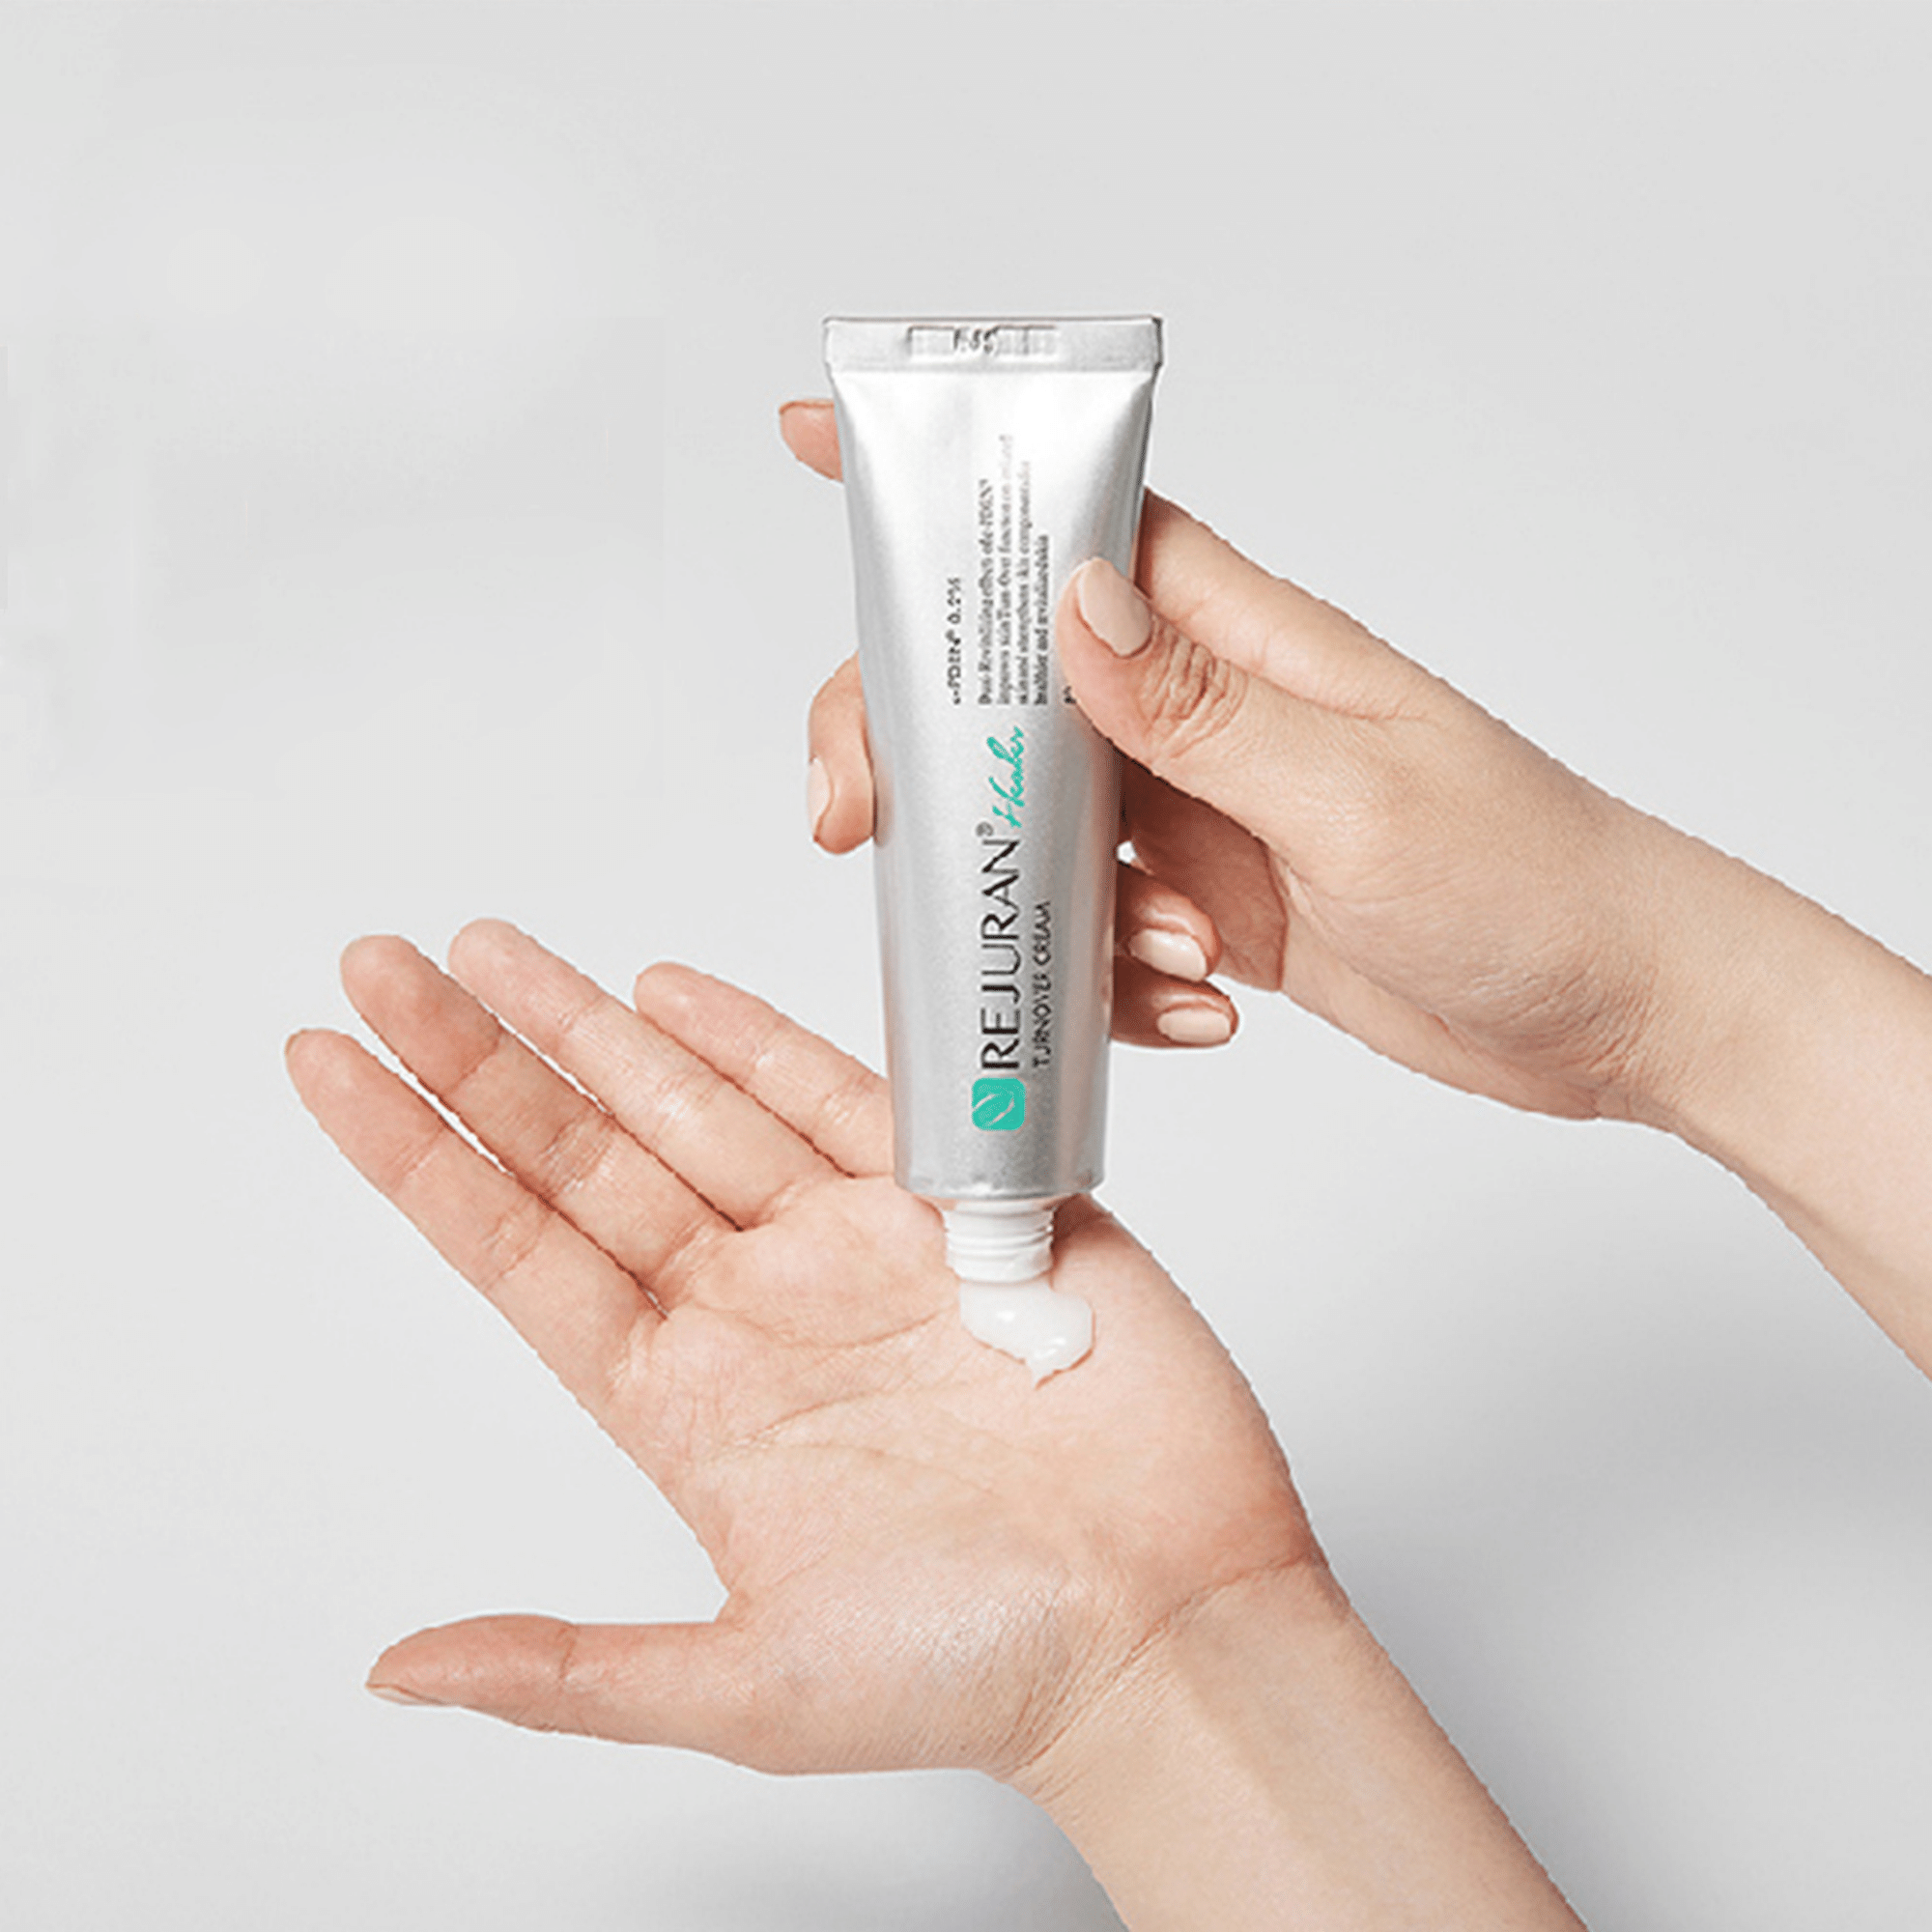 rejuran malaysia turnover cream help soothe your skin back to comfort and strengthen the skin’s natural barrier